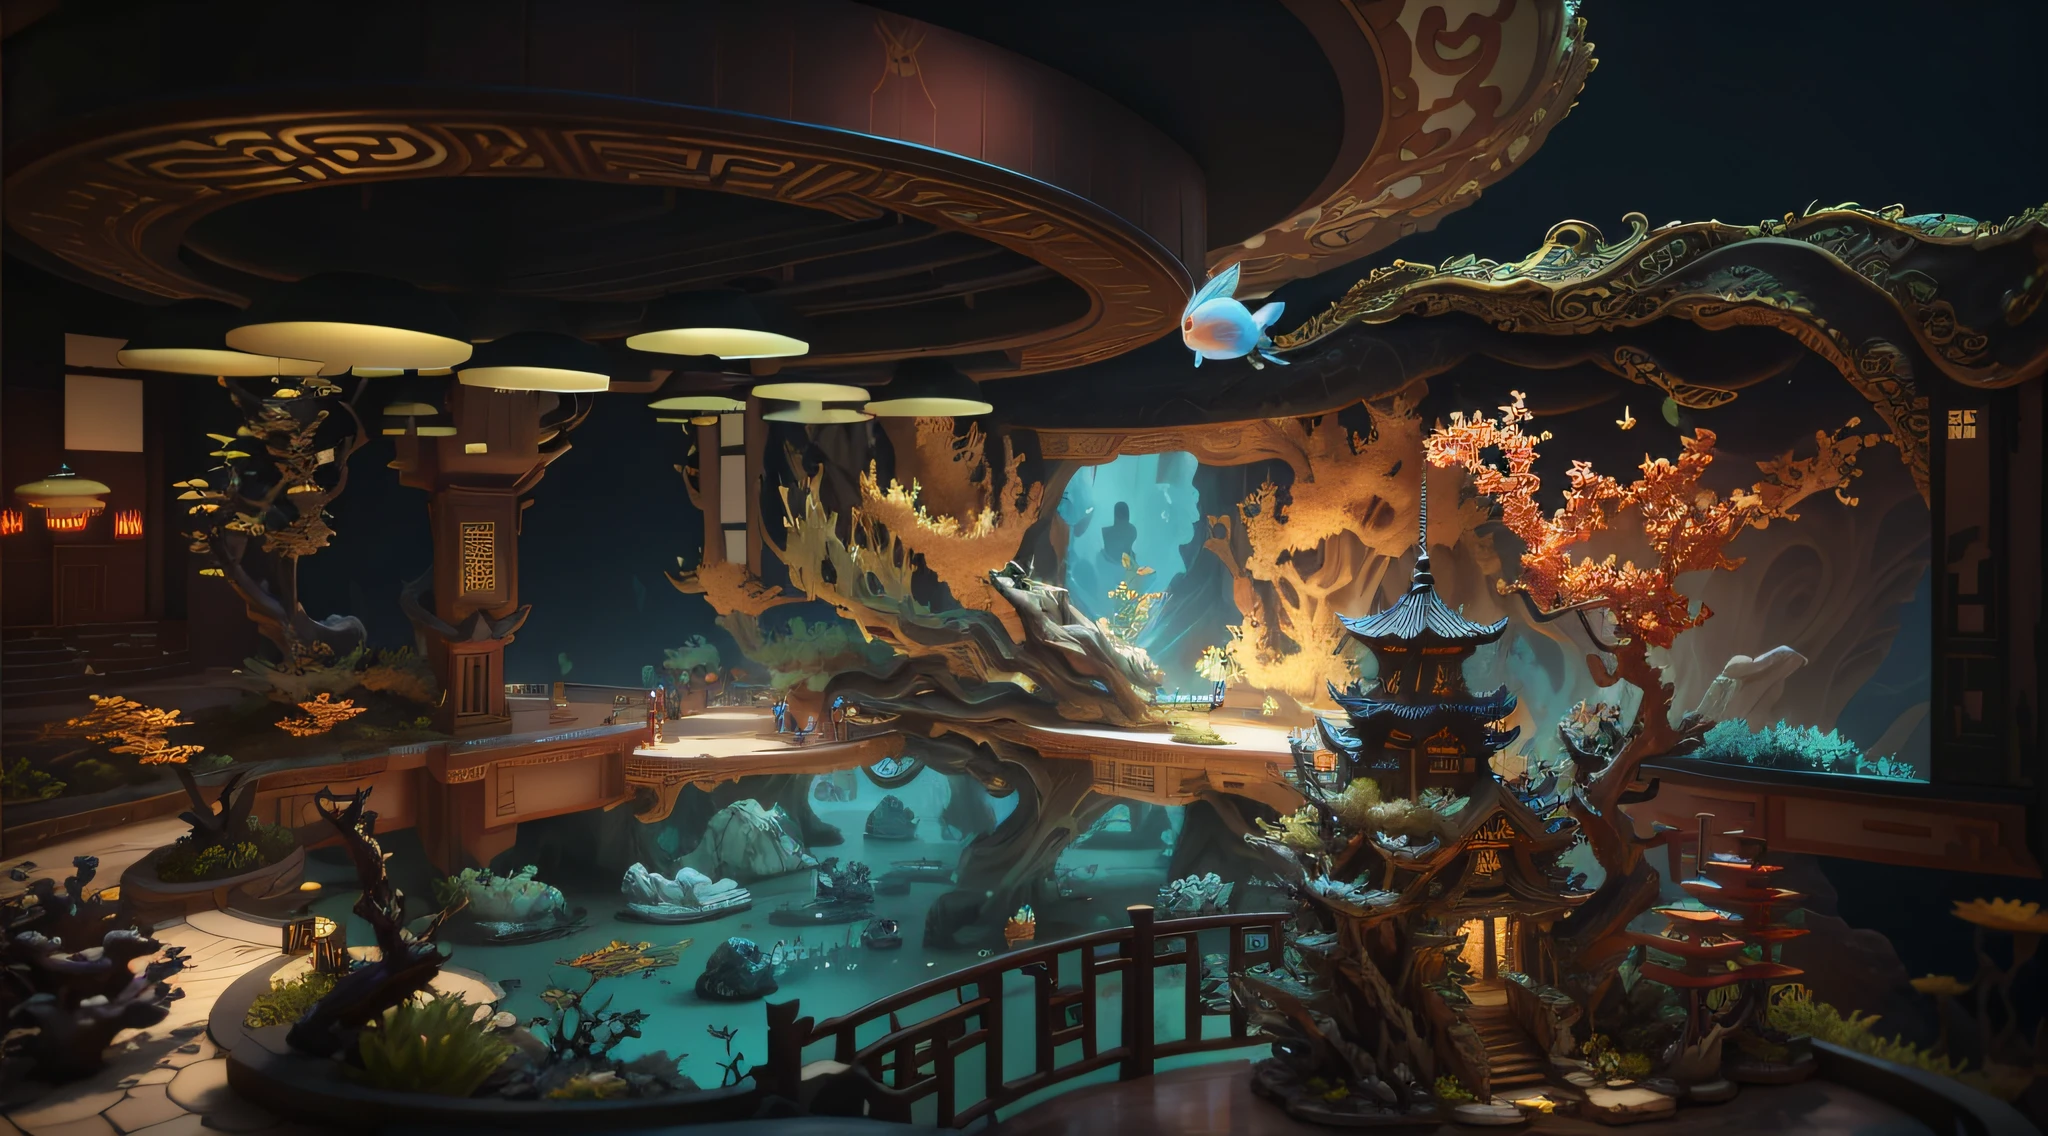 There is a large aquarium，There is a lot of water and plants inside, the empress’ swirling gardens, Beautiful rendering of the Tang Dynasty, highly detailed surreal vfx, intricate ornate anime cgi style, japonisme 3 d 8 k ultra detailed, highly detailed vfx scene, Features a miniature indoor lake, Chinese fantasy, fantasy style 8 k octane render, Underwater temple with fish